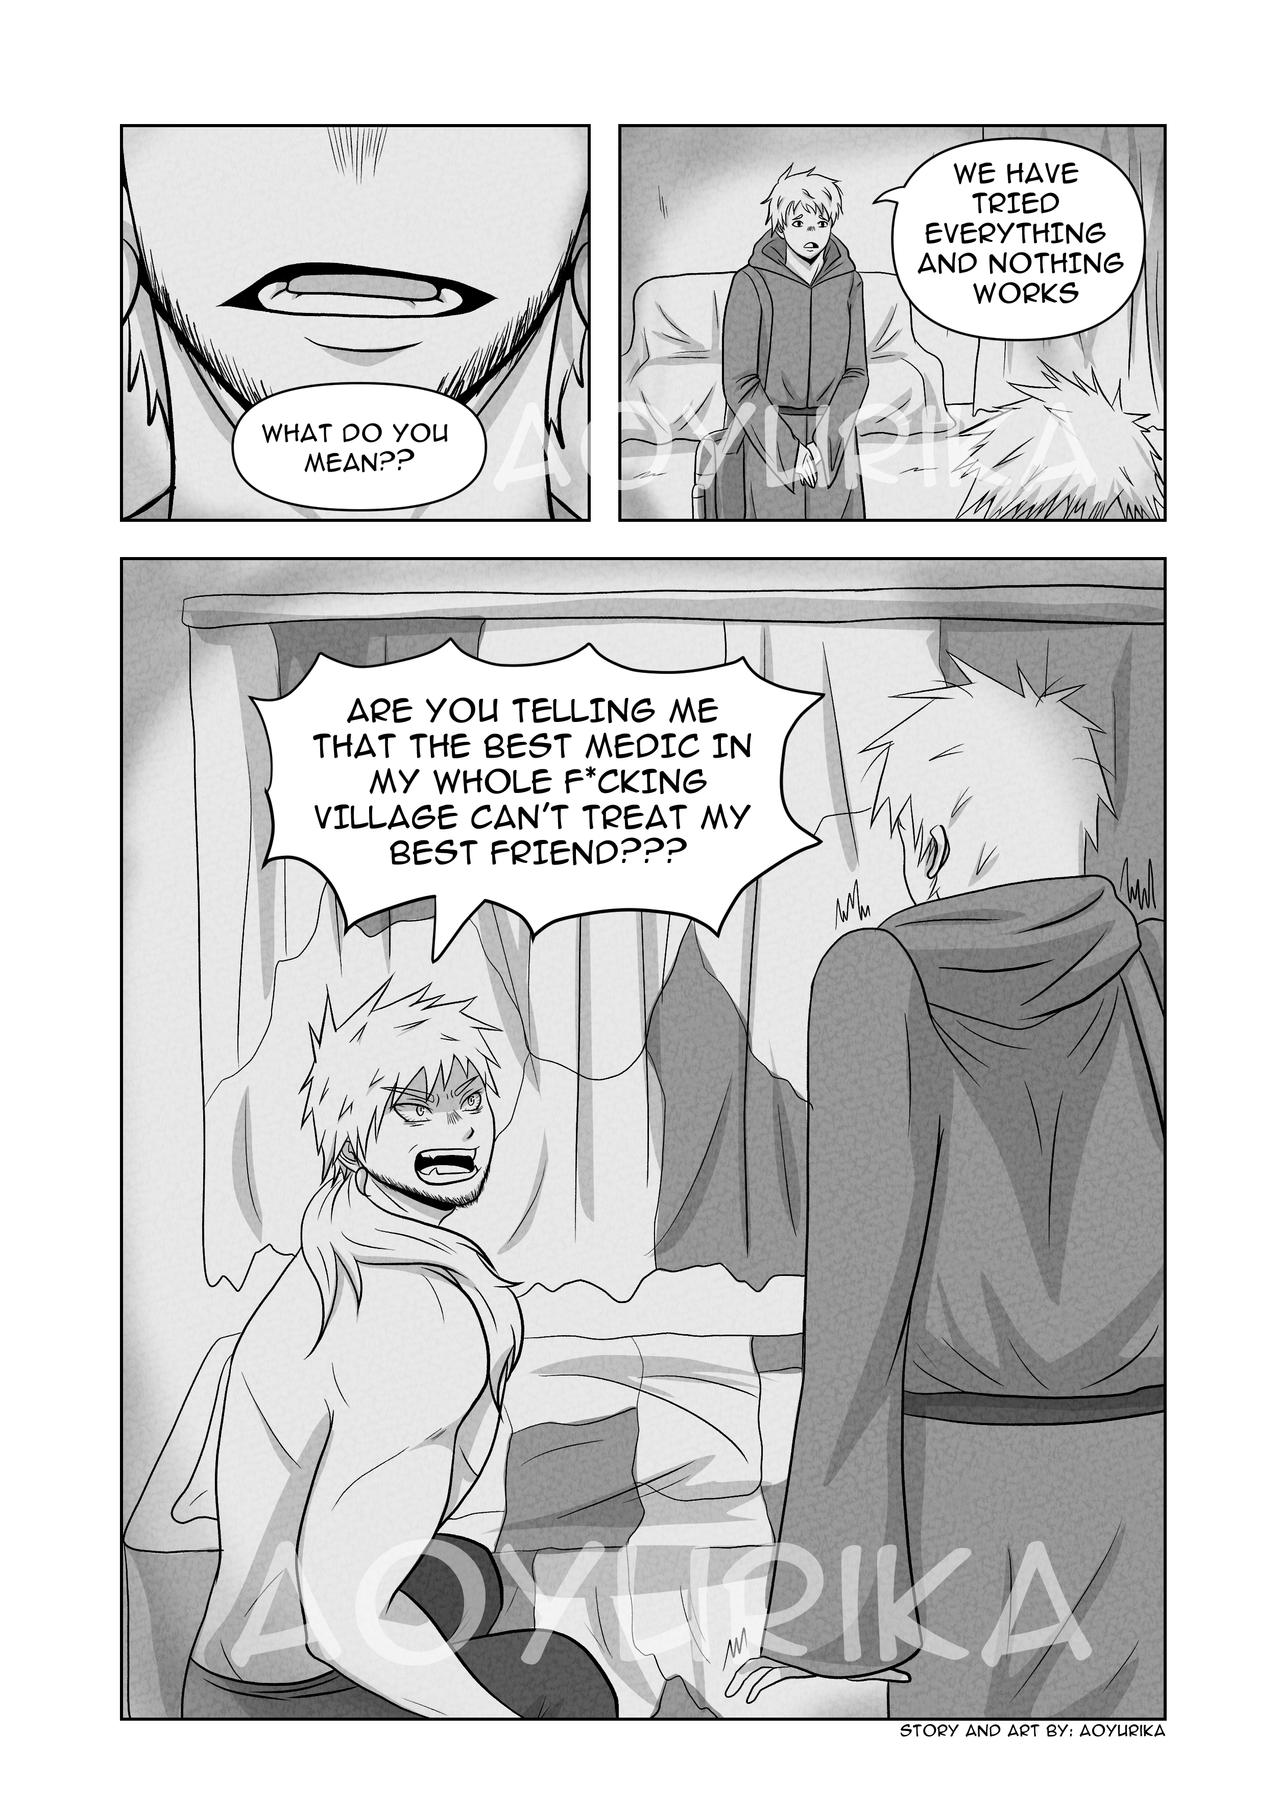 A miracle smile - PAGE 25 by RunStrayWolf on DeviantArt